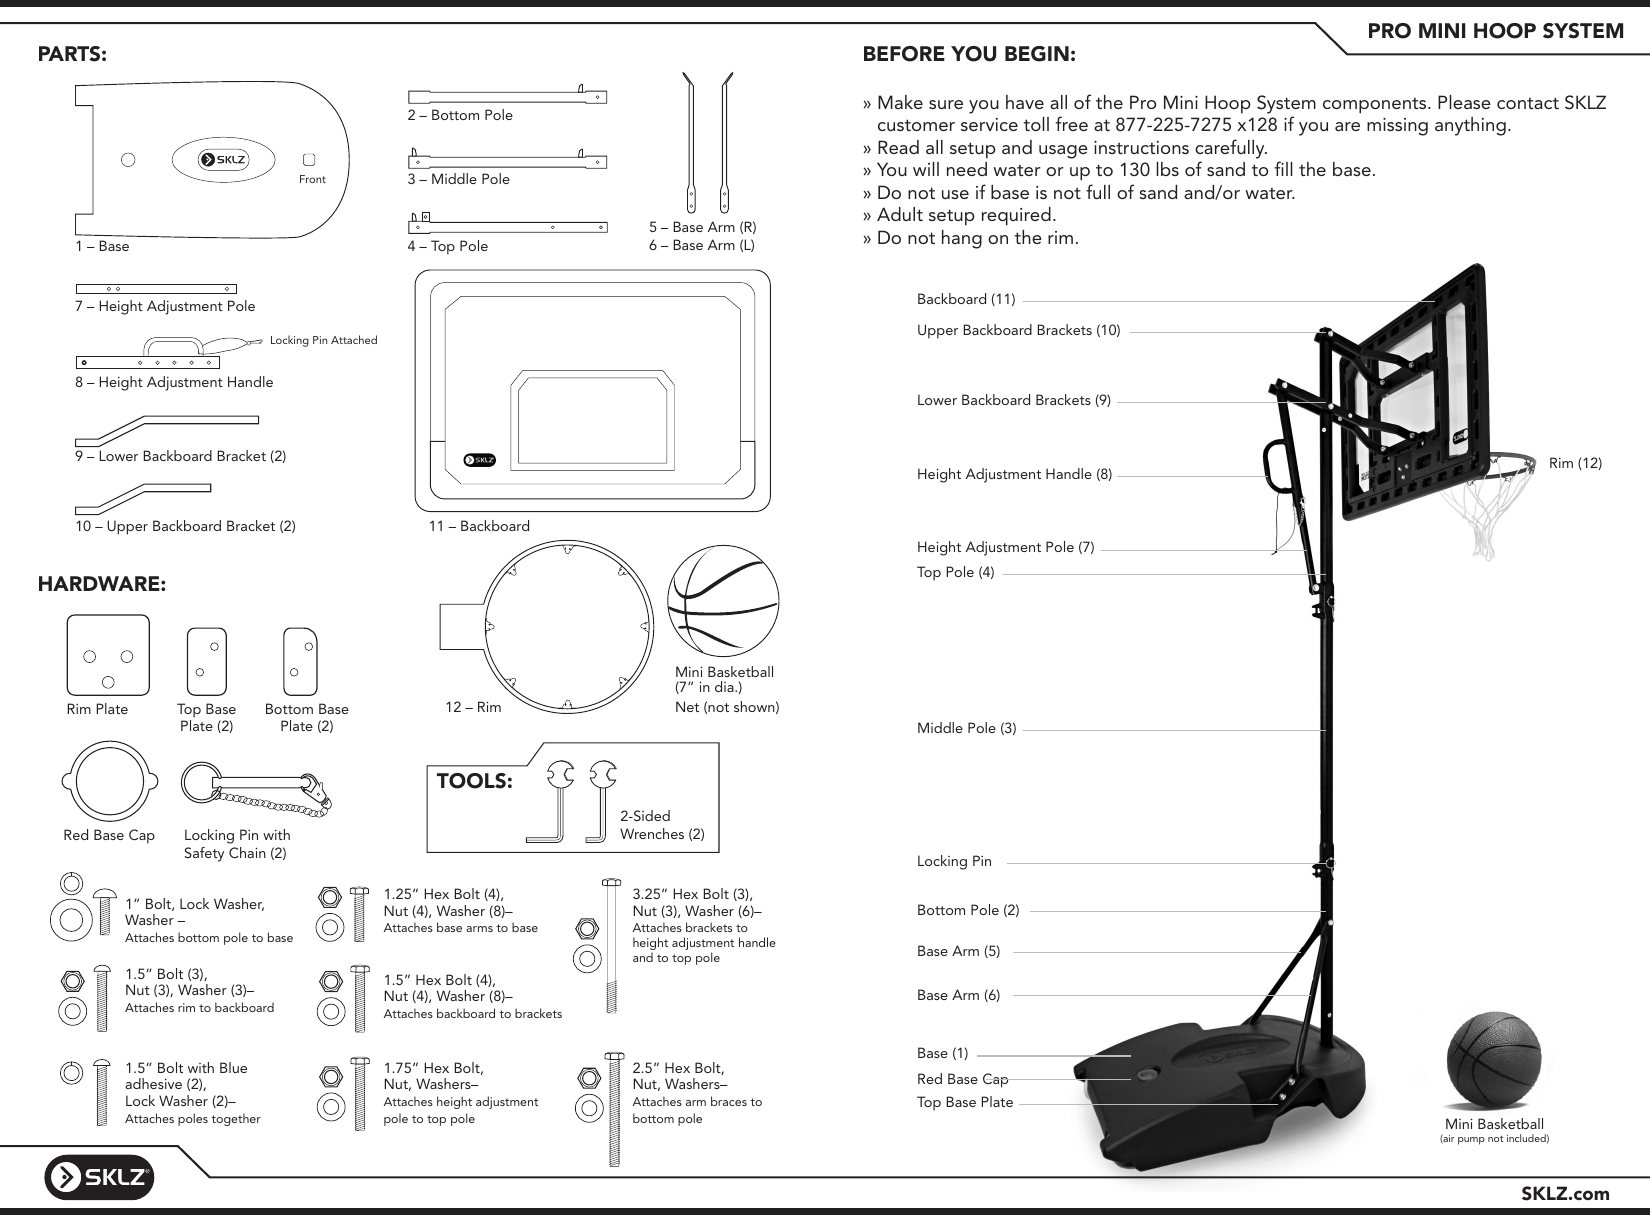 Page 2 of 5 - Pro Mini Hoop System Instructions